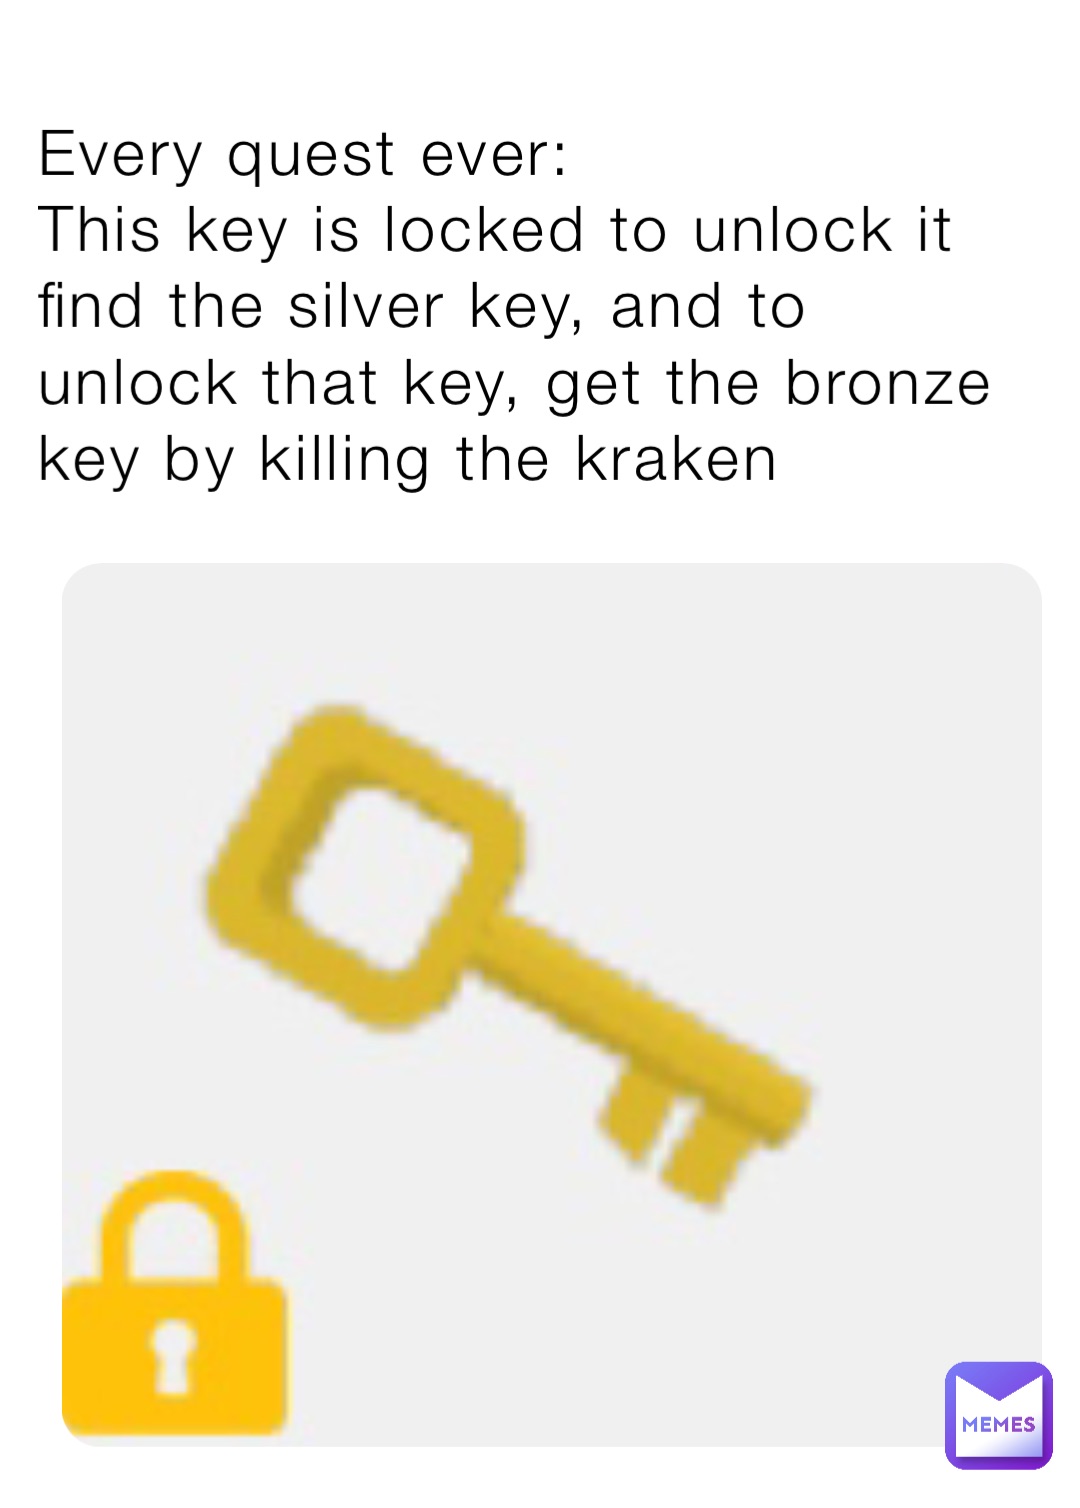 Every quest ever:
This key is locked to unlock it find the silver key, and to unlock that key, get the bronze key by killing the kraken